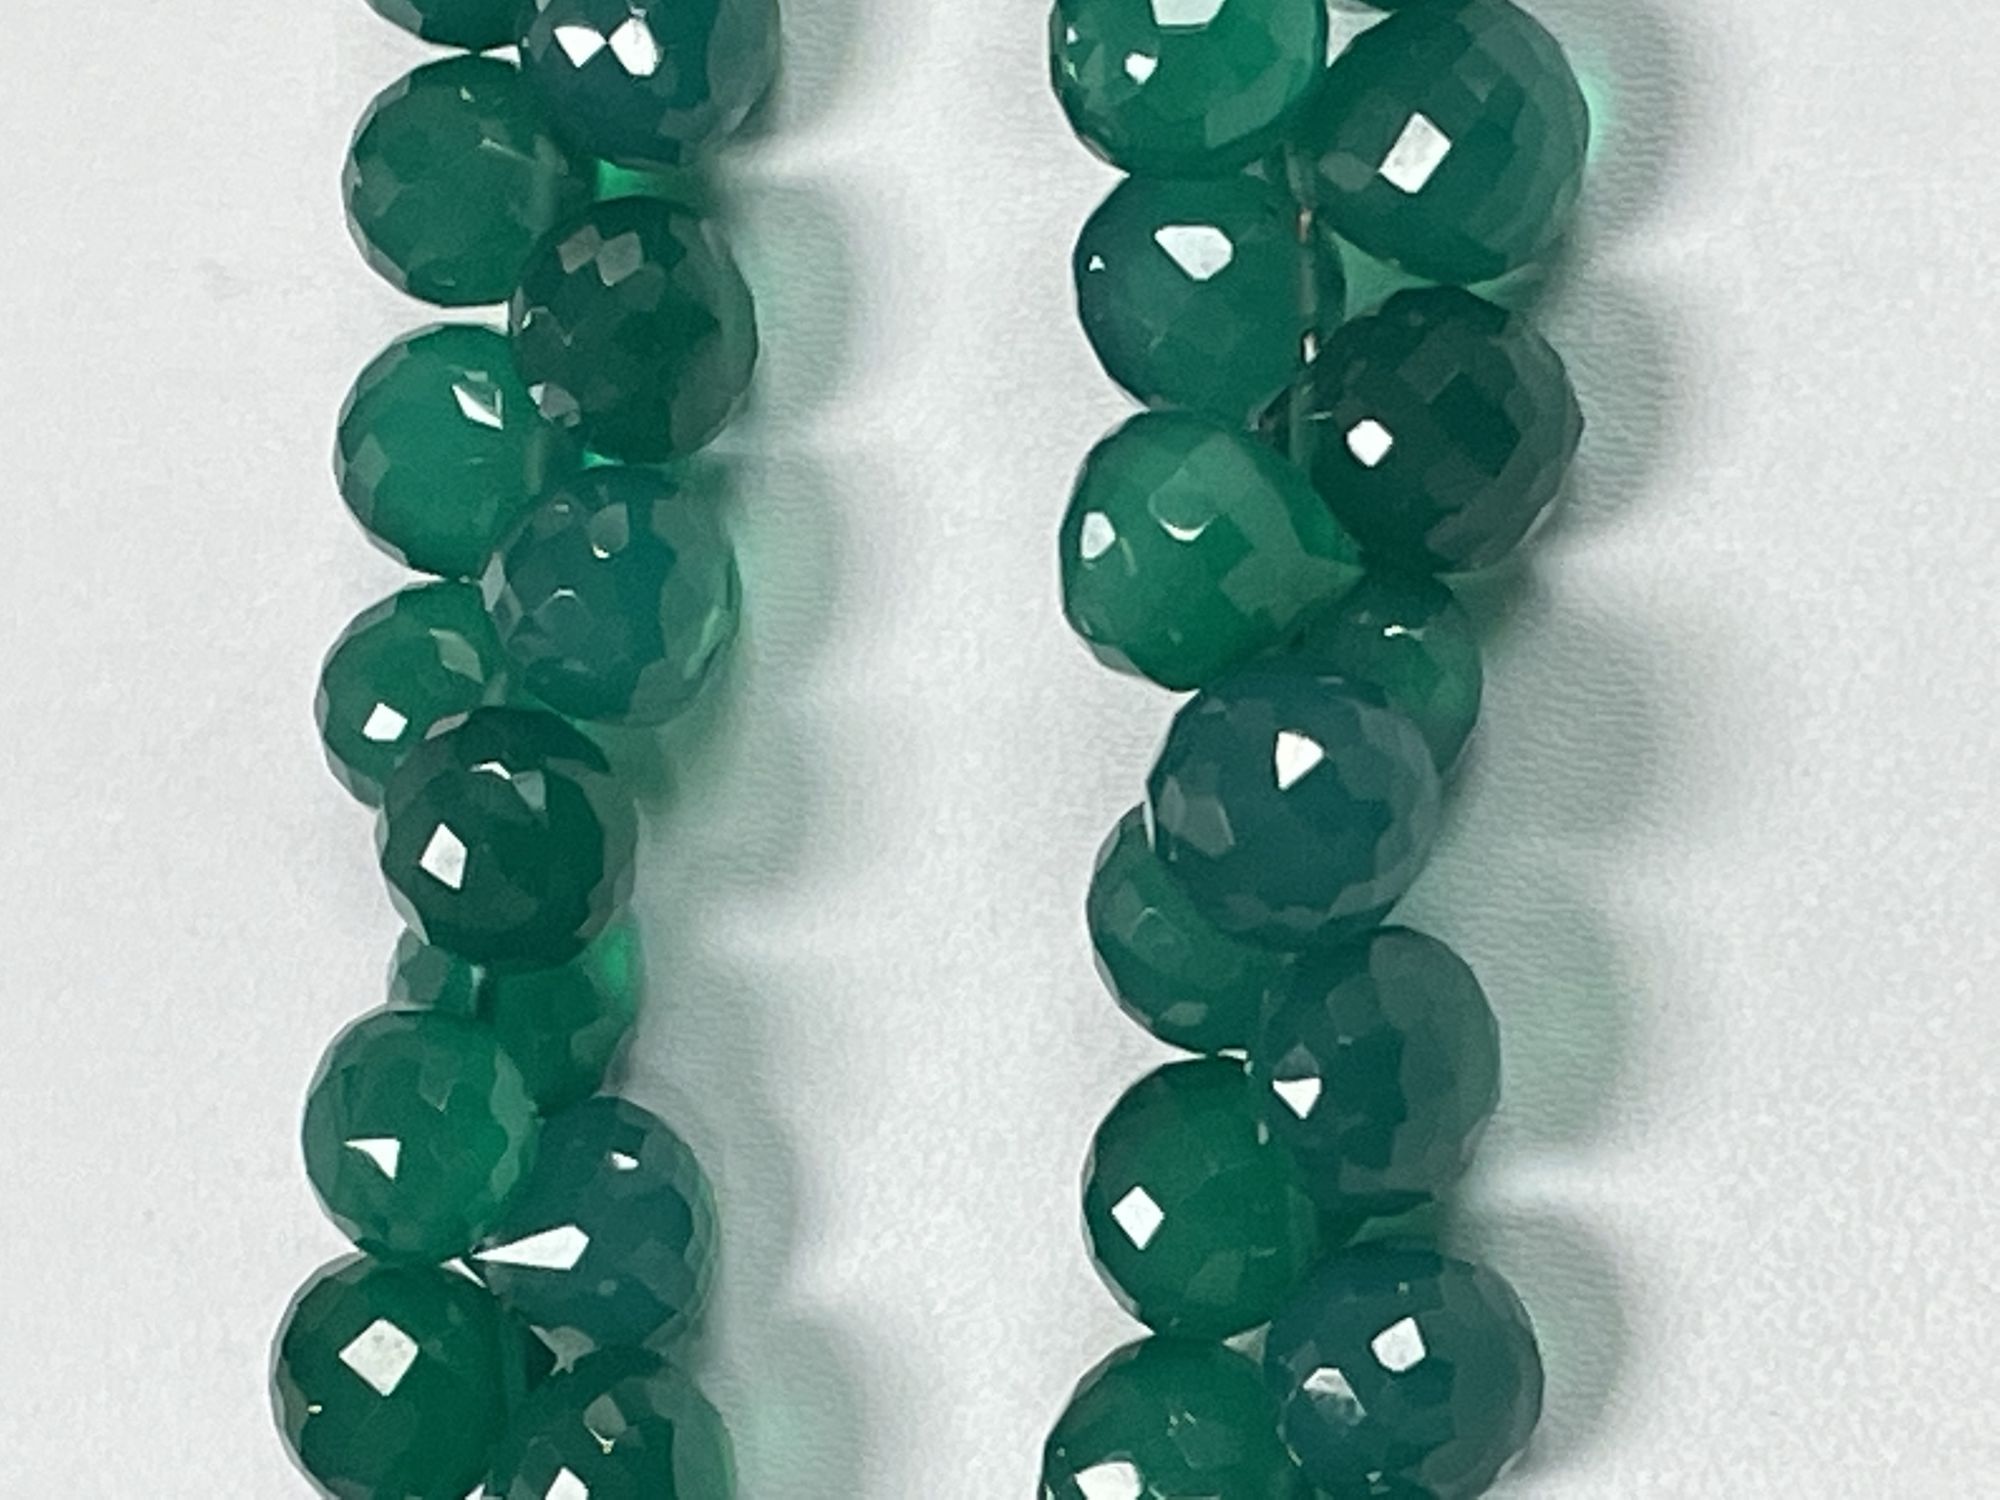 Green Onyx Onions Faceted